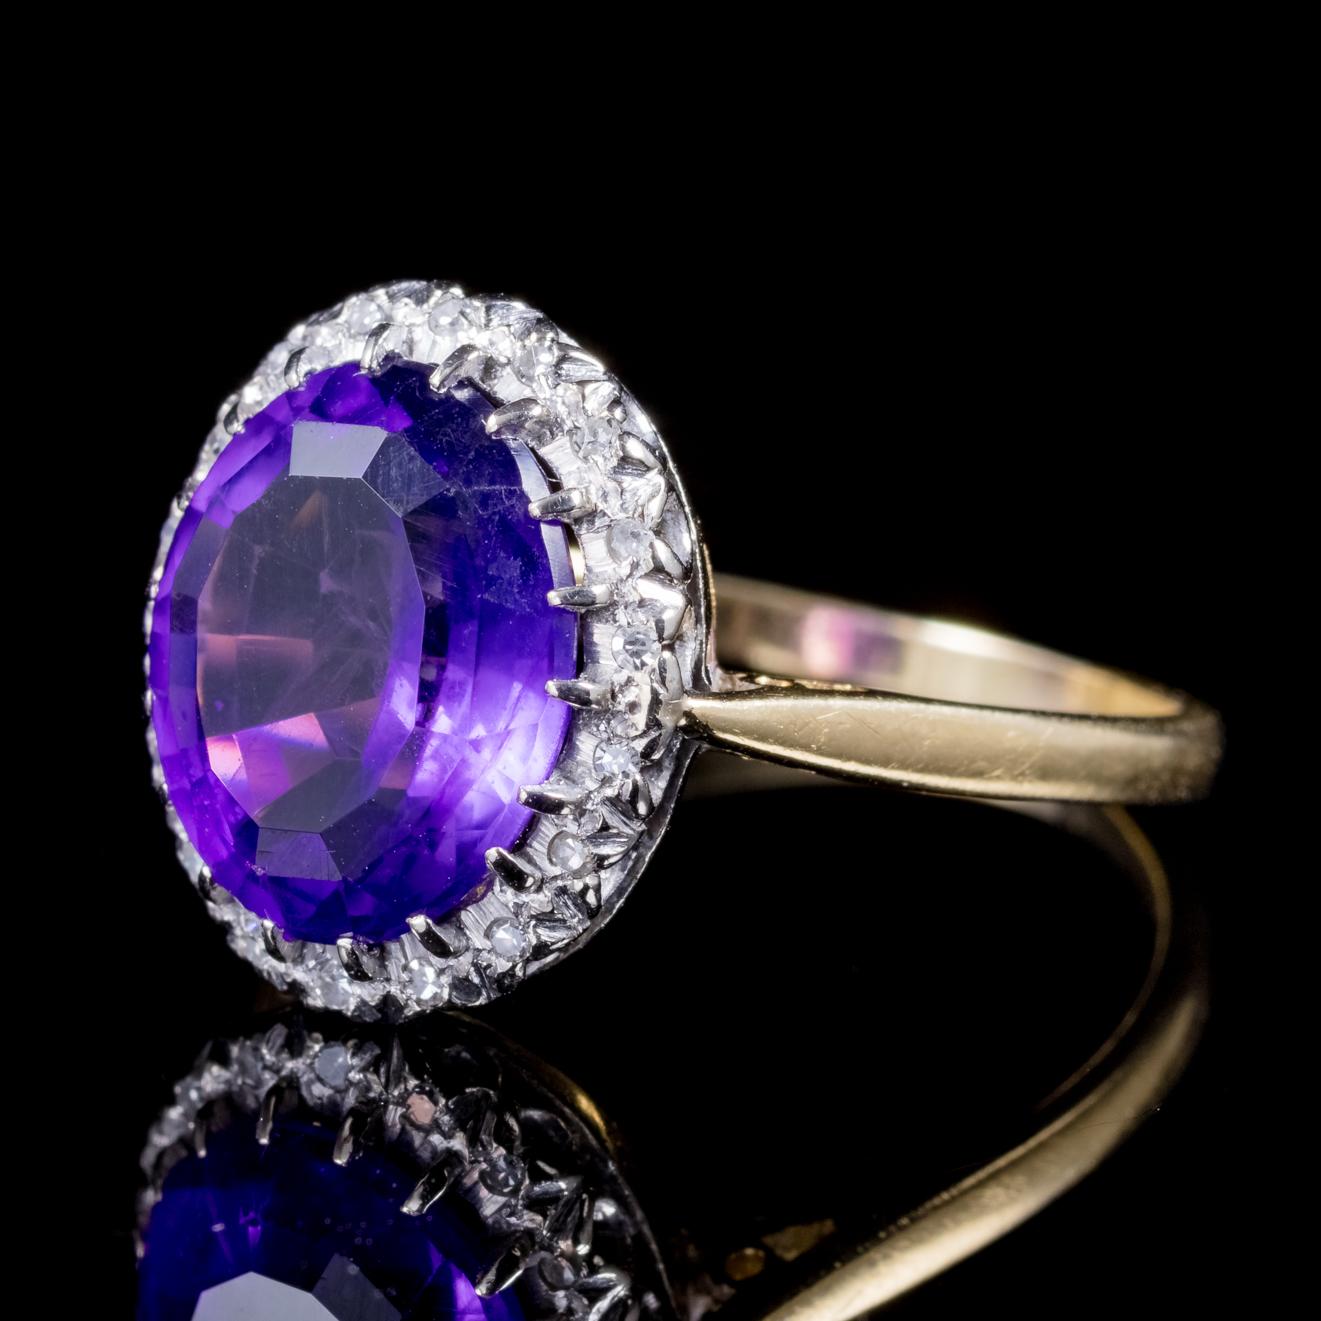 A spectacular antique Victorian ring C. 1900, adorned with a fabulous Amethyst stone which is approx. 5ct in size and haloed by old brilliant cut Diamonds. 

Amethyst has been highly esteemed throughout the ages for its stunning beauty which has